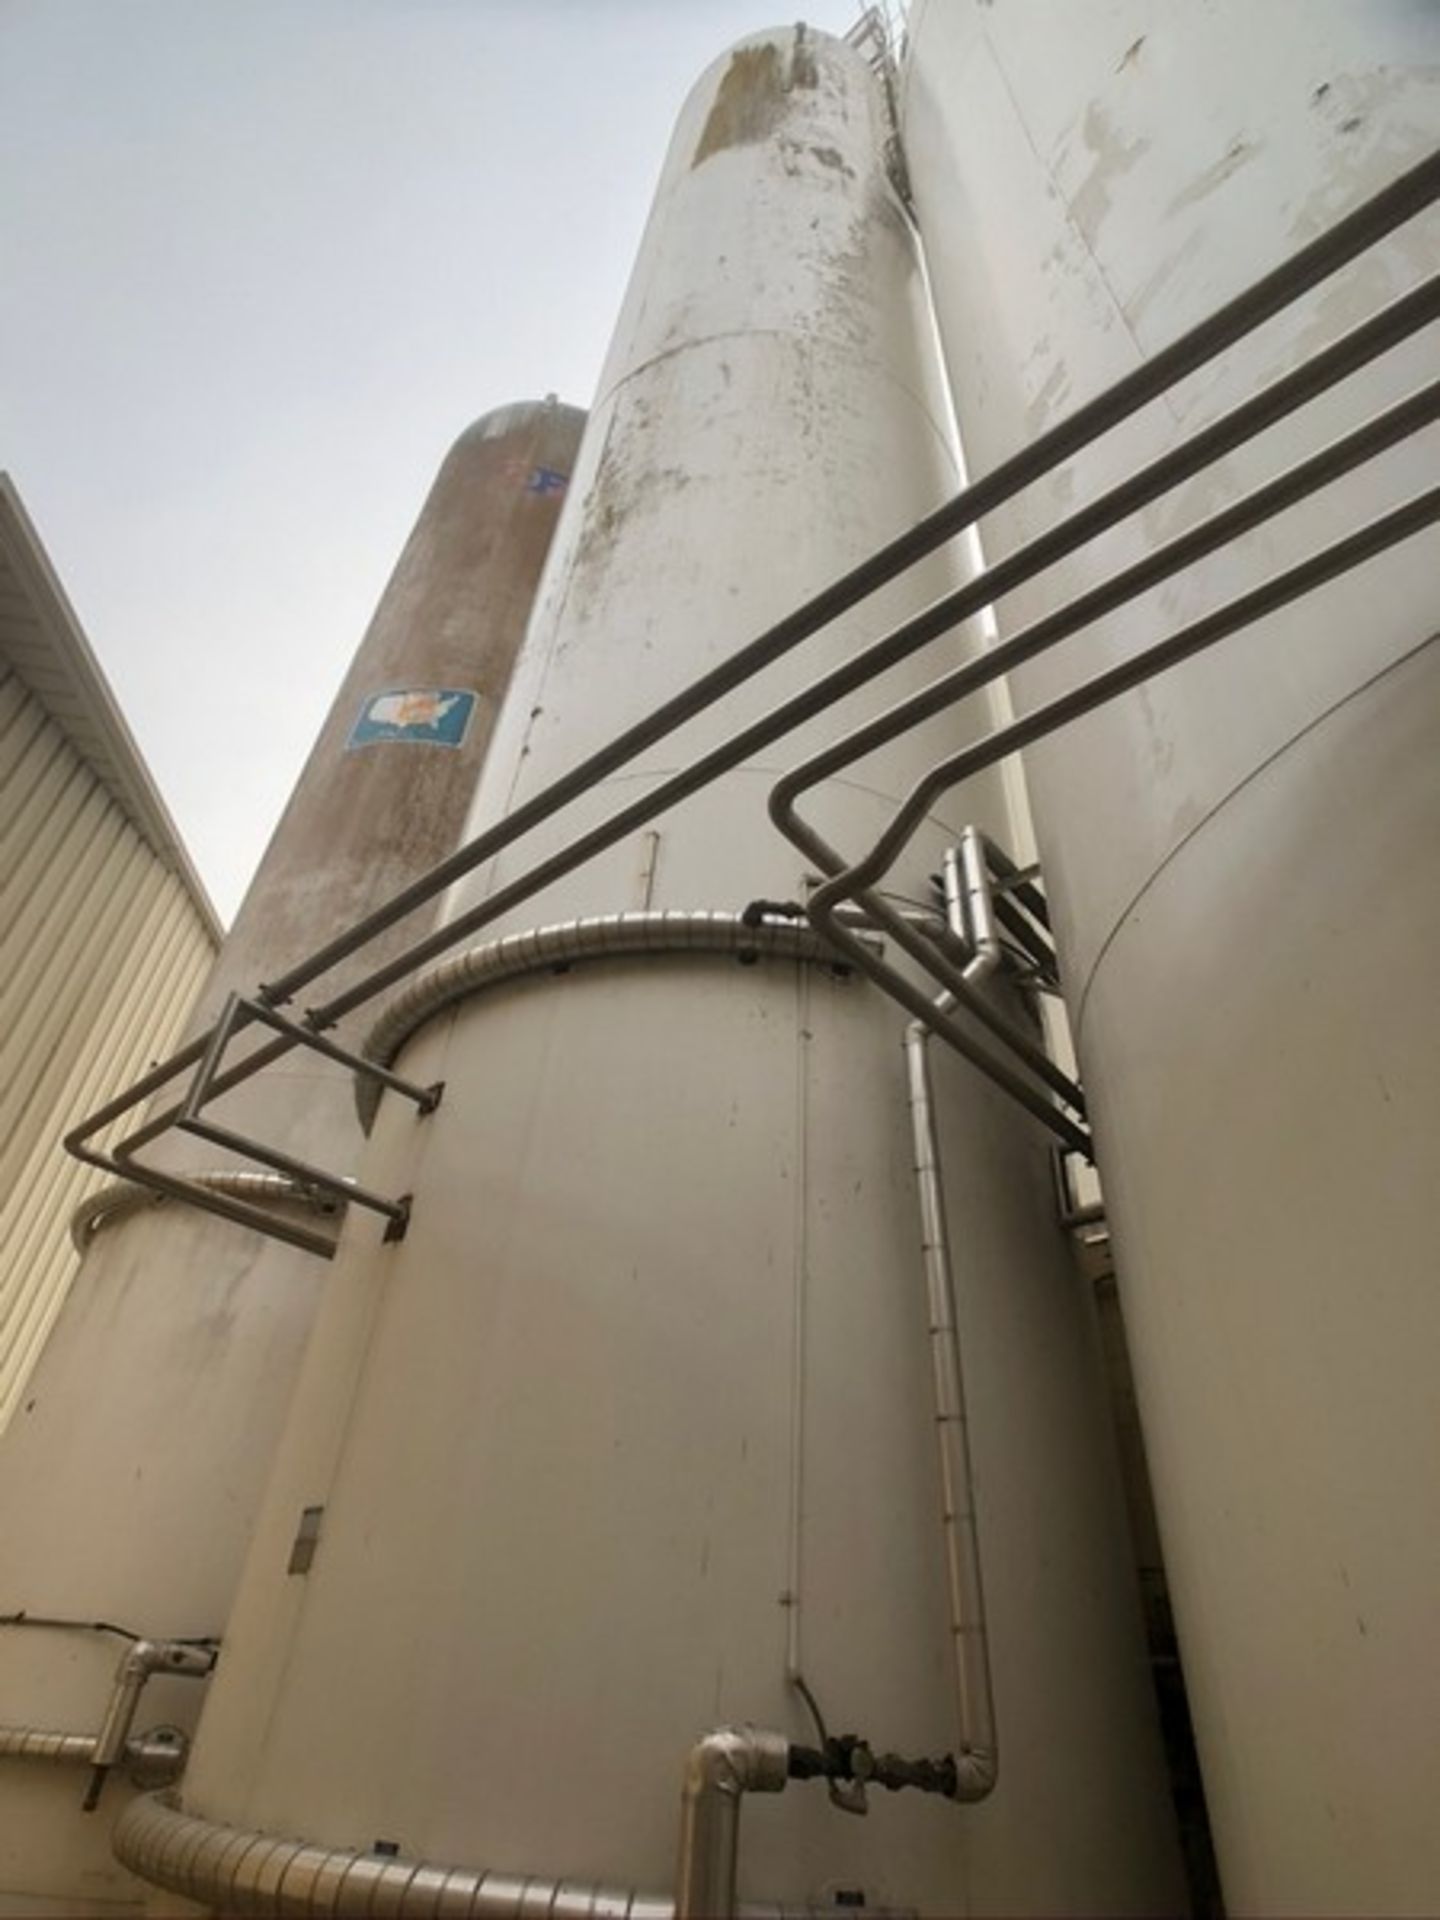 MUELLER 60,000 GALLON JACKETED SILO, S/N 110549, HORIZONTAL AGITATION - Image 2 of 30